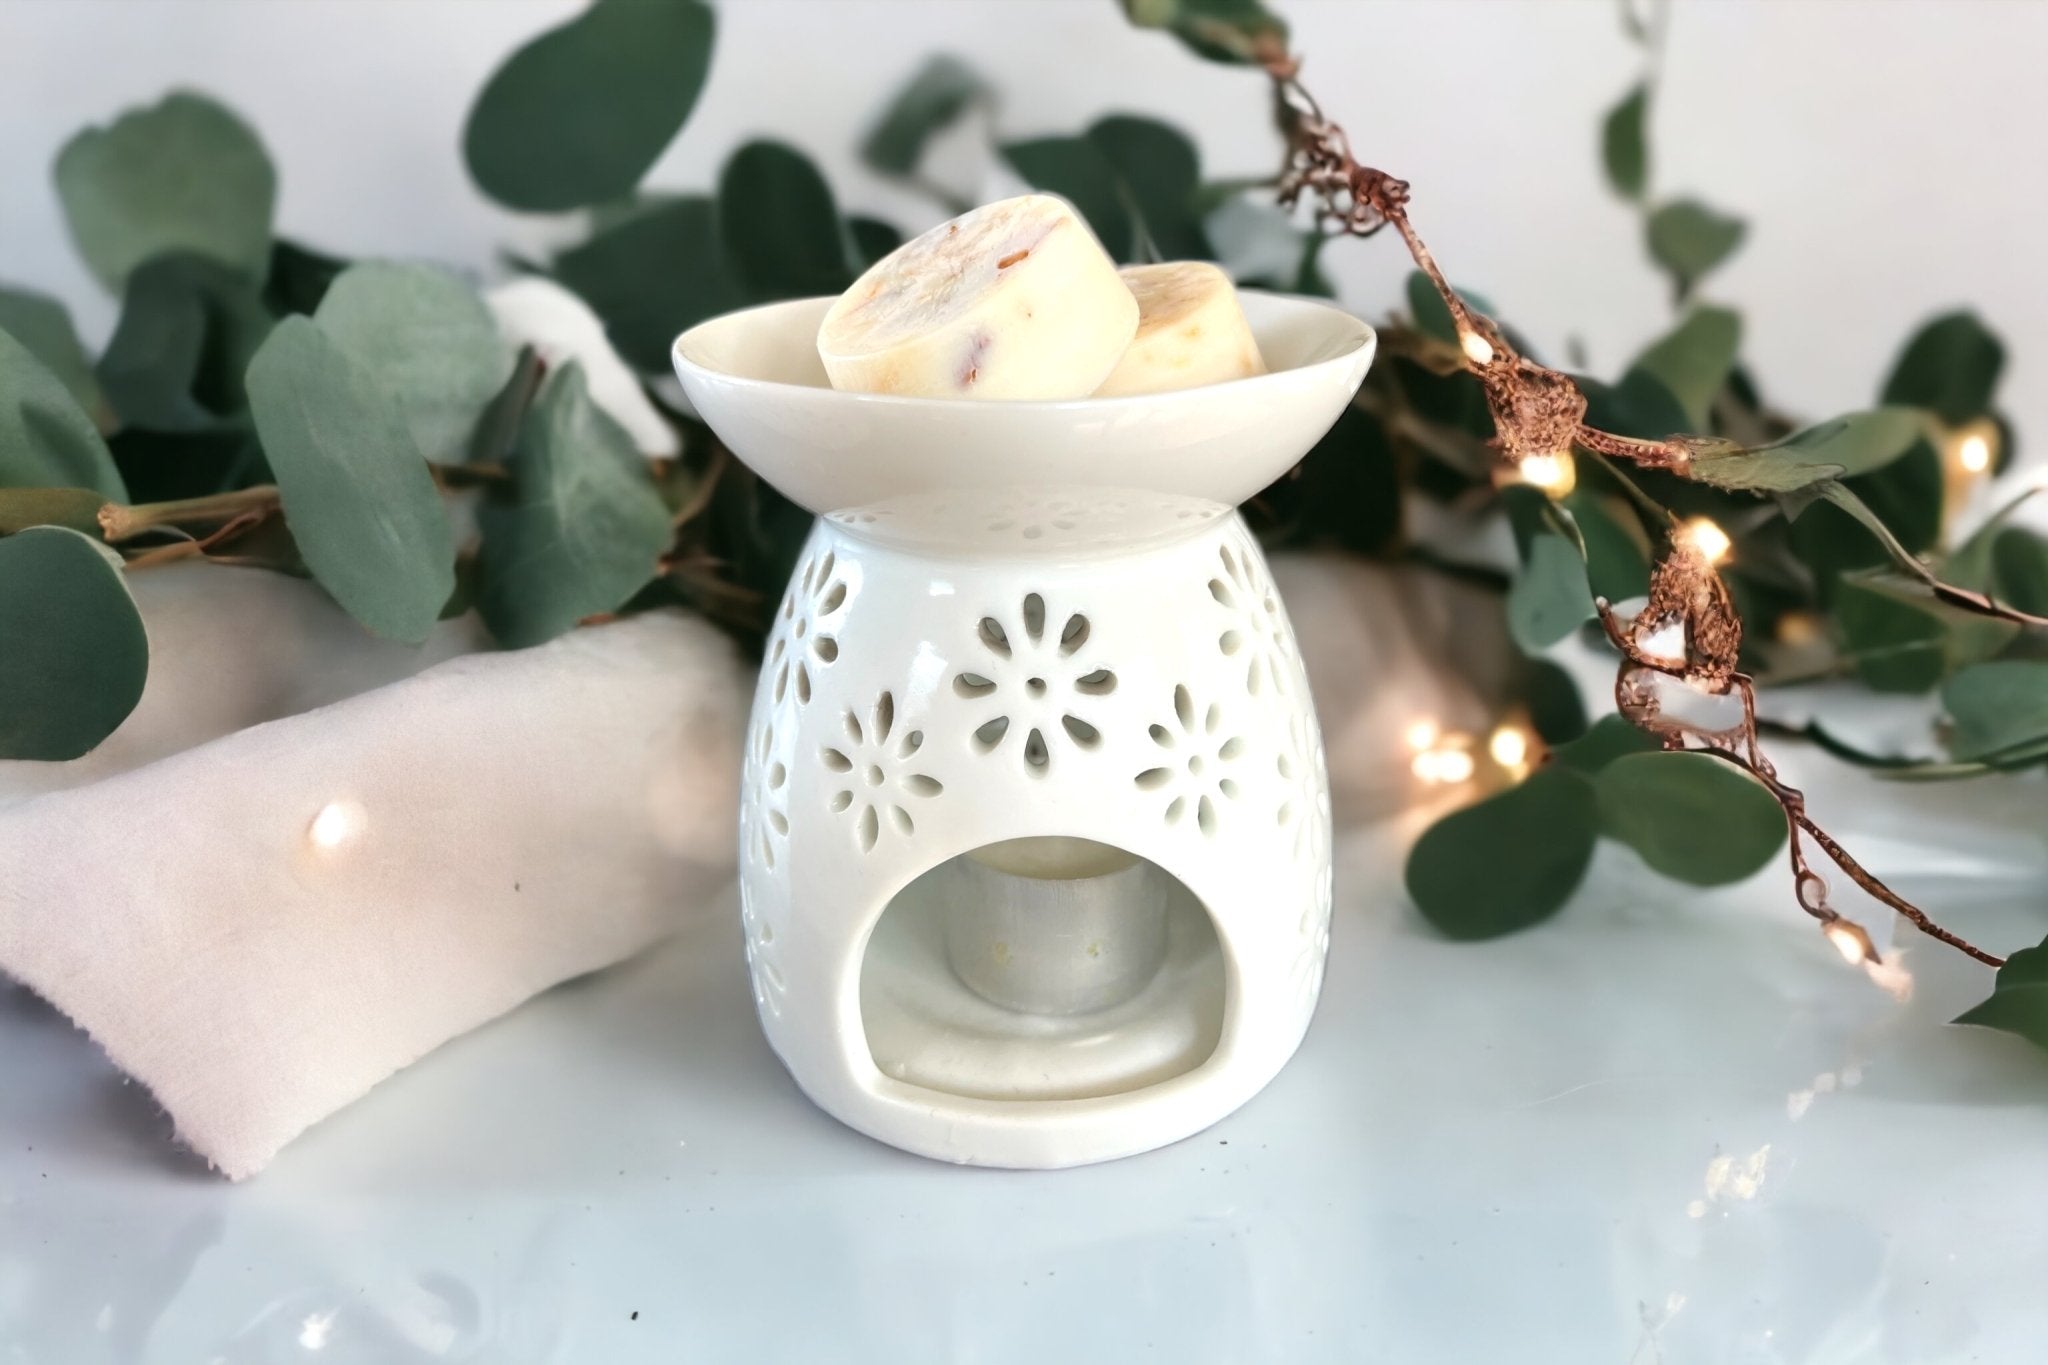 a white oil burner with soy wax melt pods and a decorative eucalyptus plant